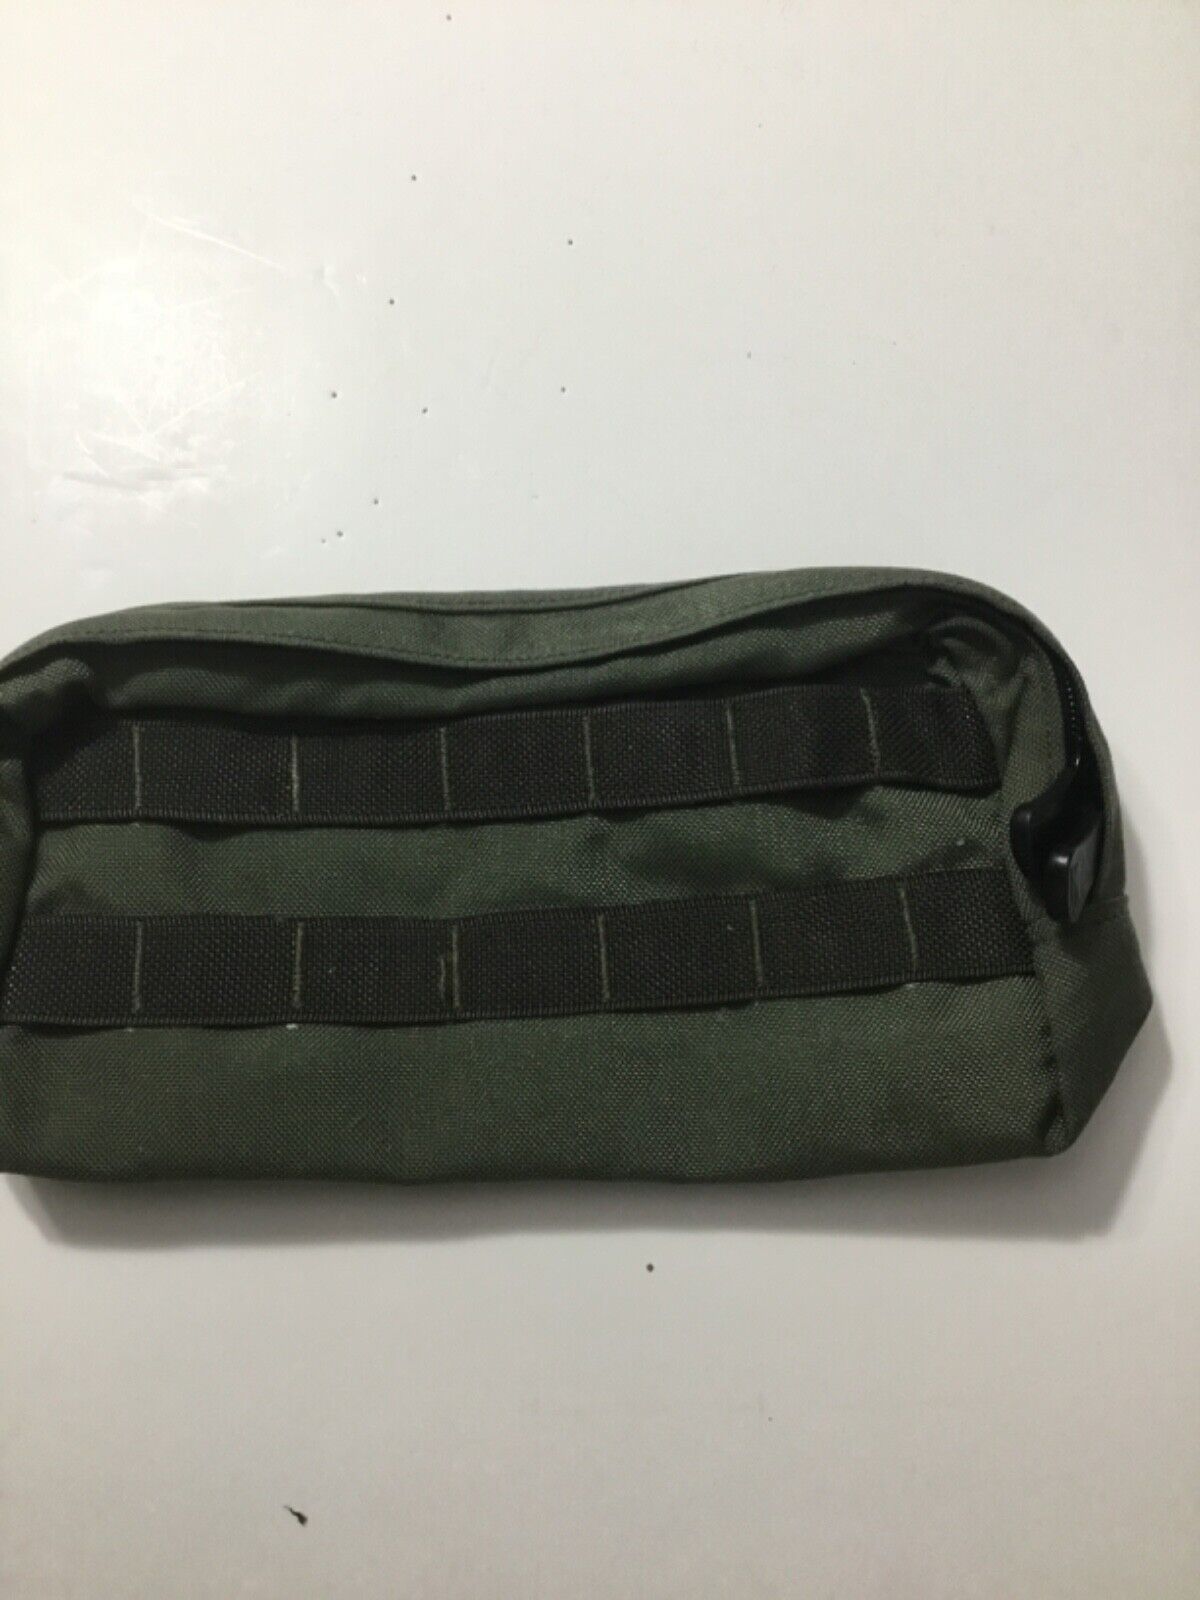 Pre-MSA Paraclete Smoke Green MOLLE Medium General Purpose Pouch Never issued